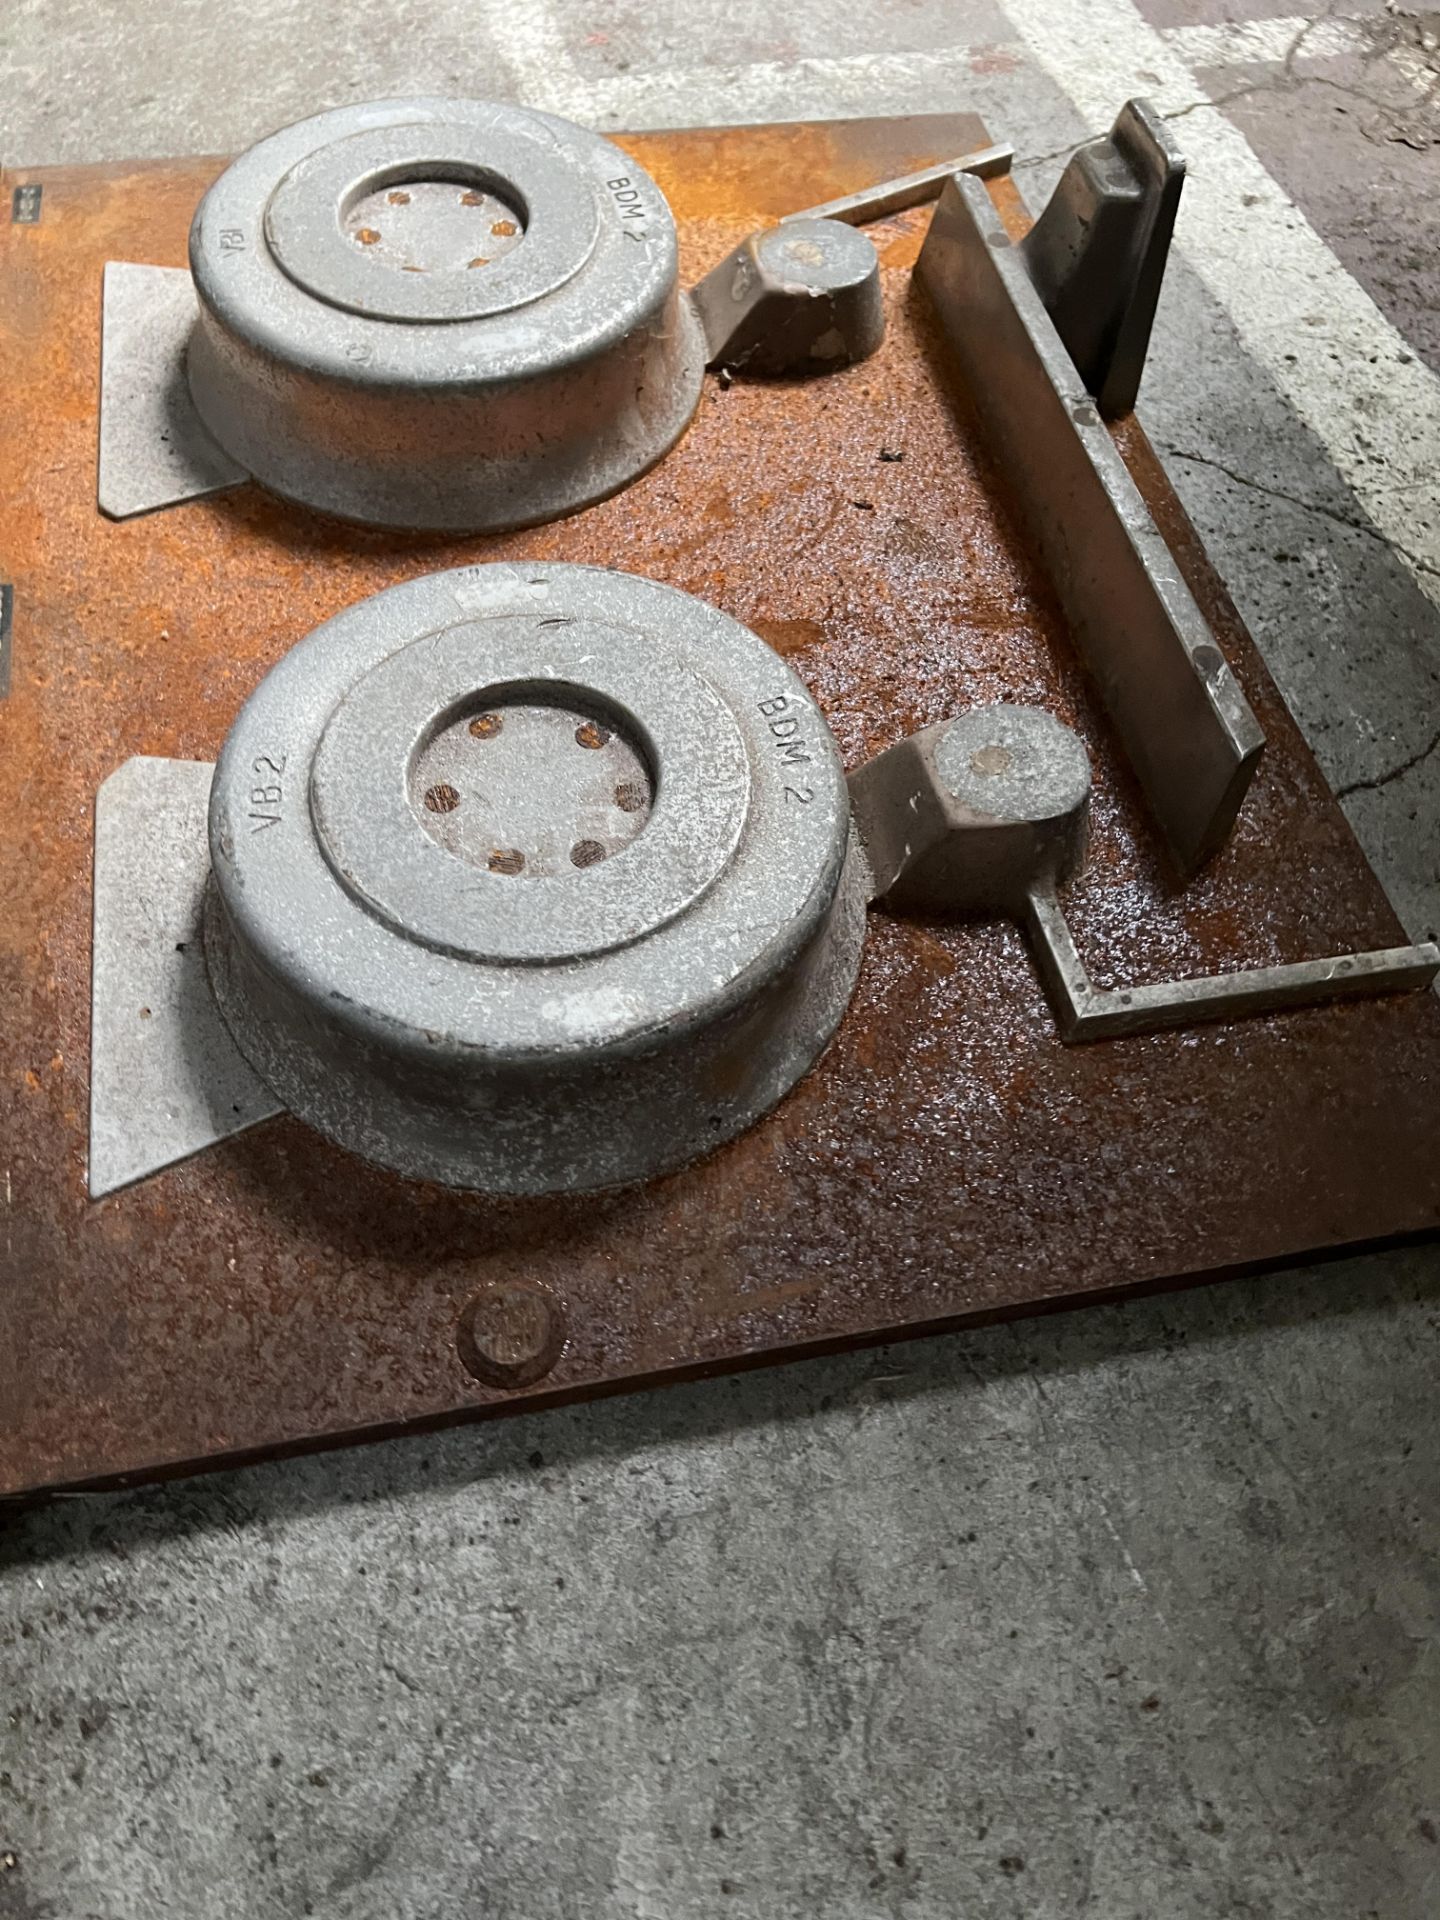 3: Various Single Sides of Brake Disc and Drum Casting Patterns. Bottom Mould is for Austin, - Image 9 of 15